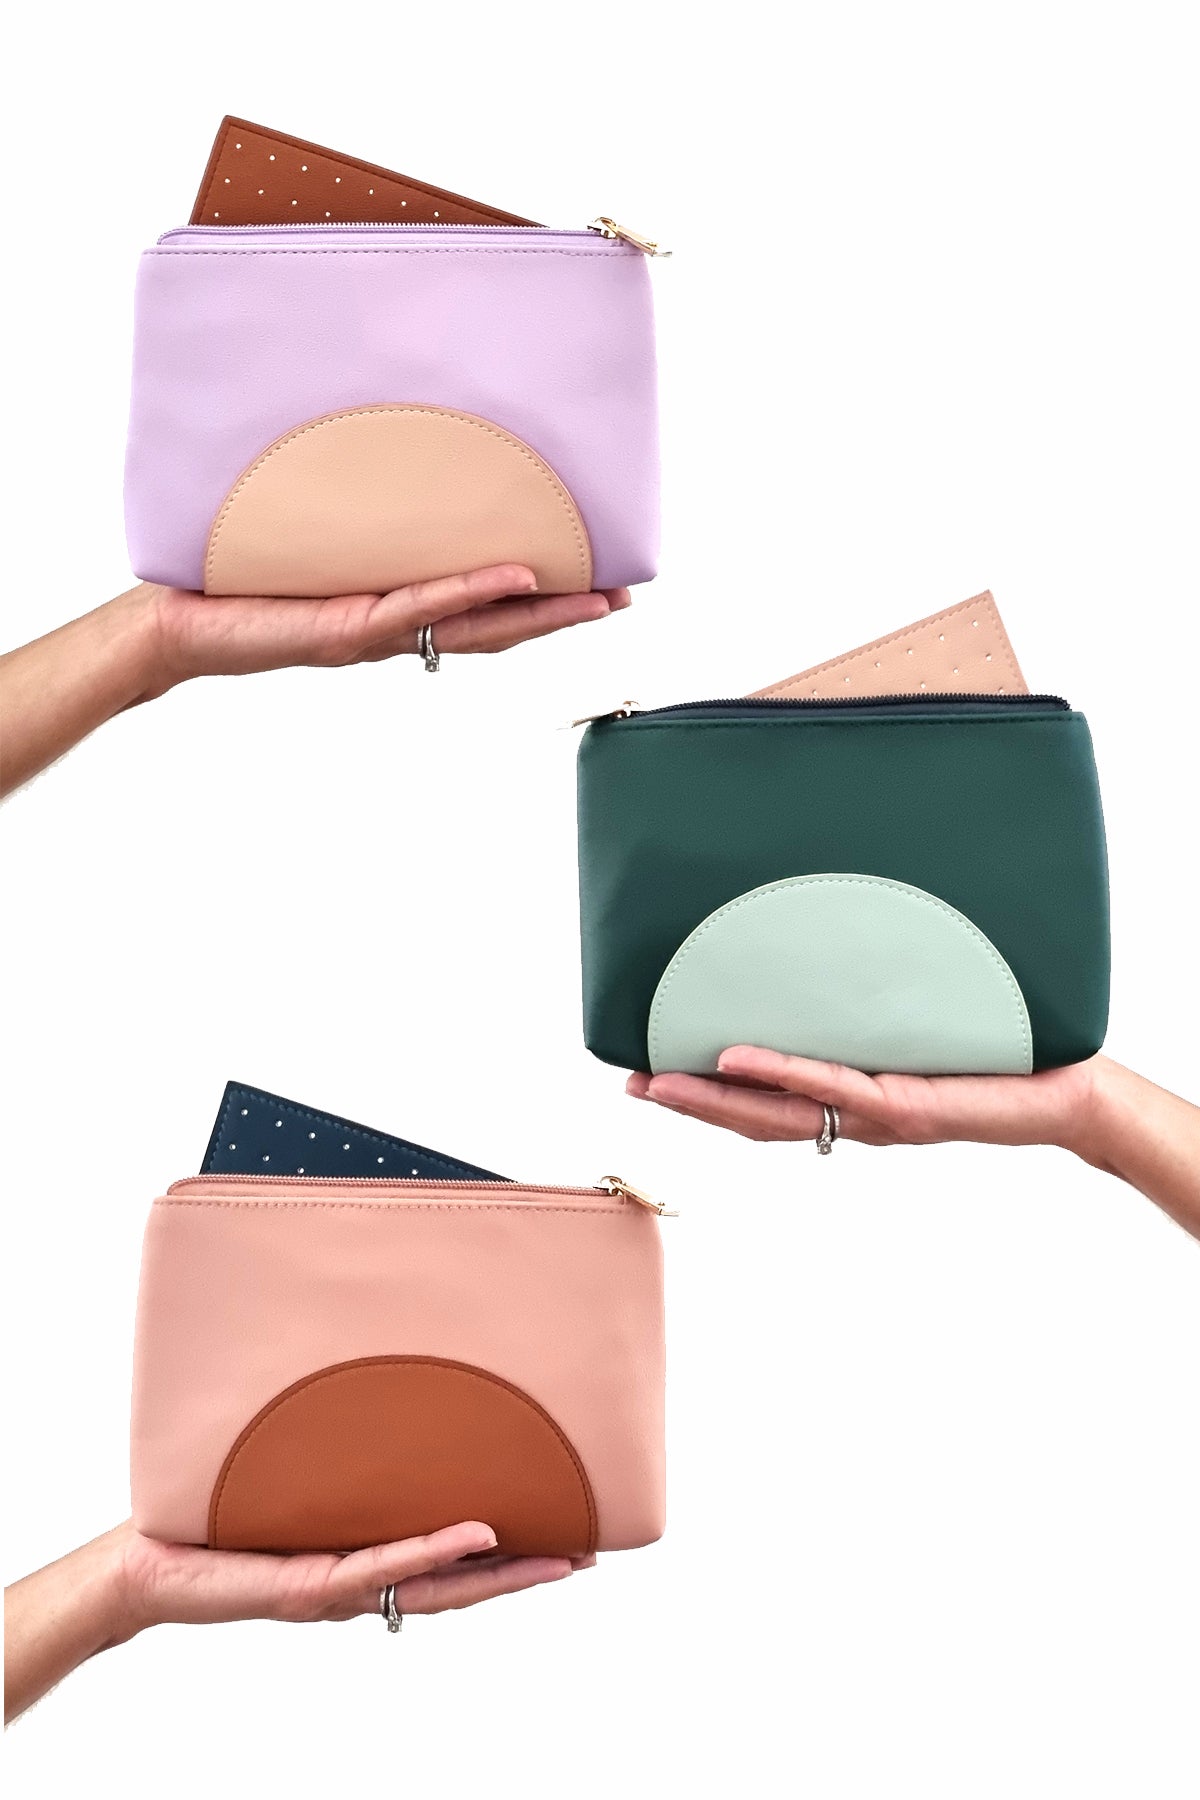 Three outstretched hands hold three Cartwheel purses against a white background. The purses are lilac with a peach half circle and tan insert, forest green with a duckegg half circle and peach insert, and pink with a tan half circle and teal insert.